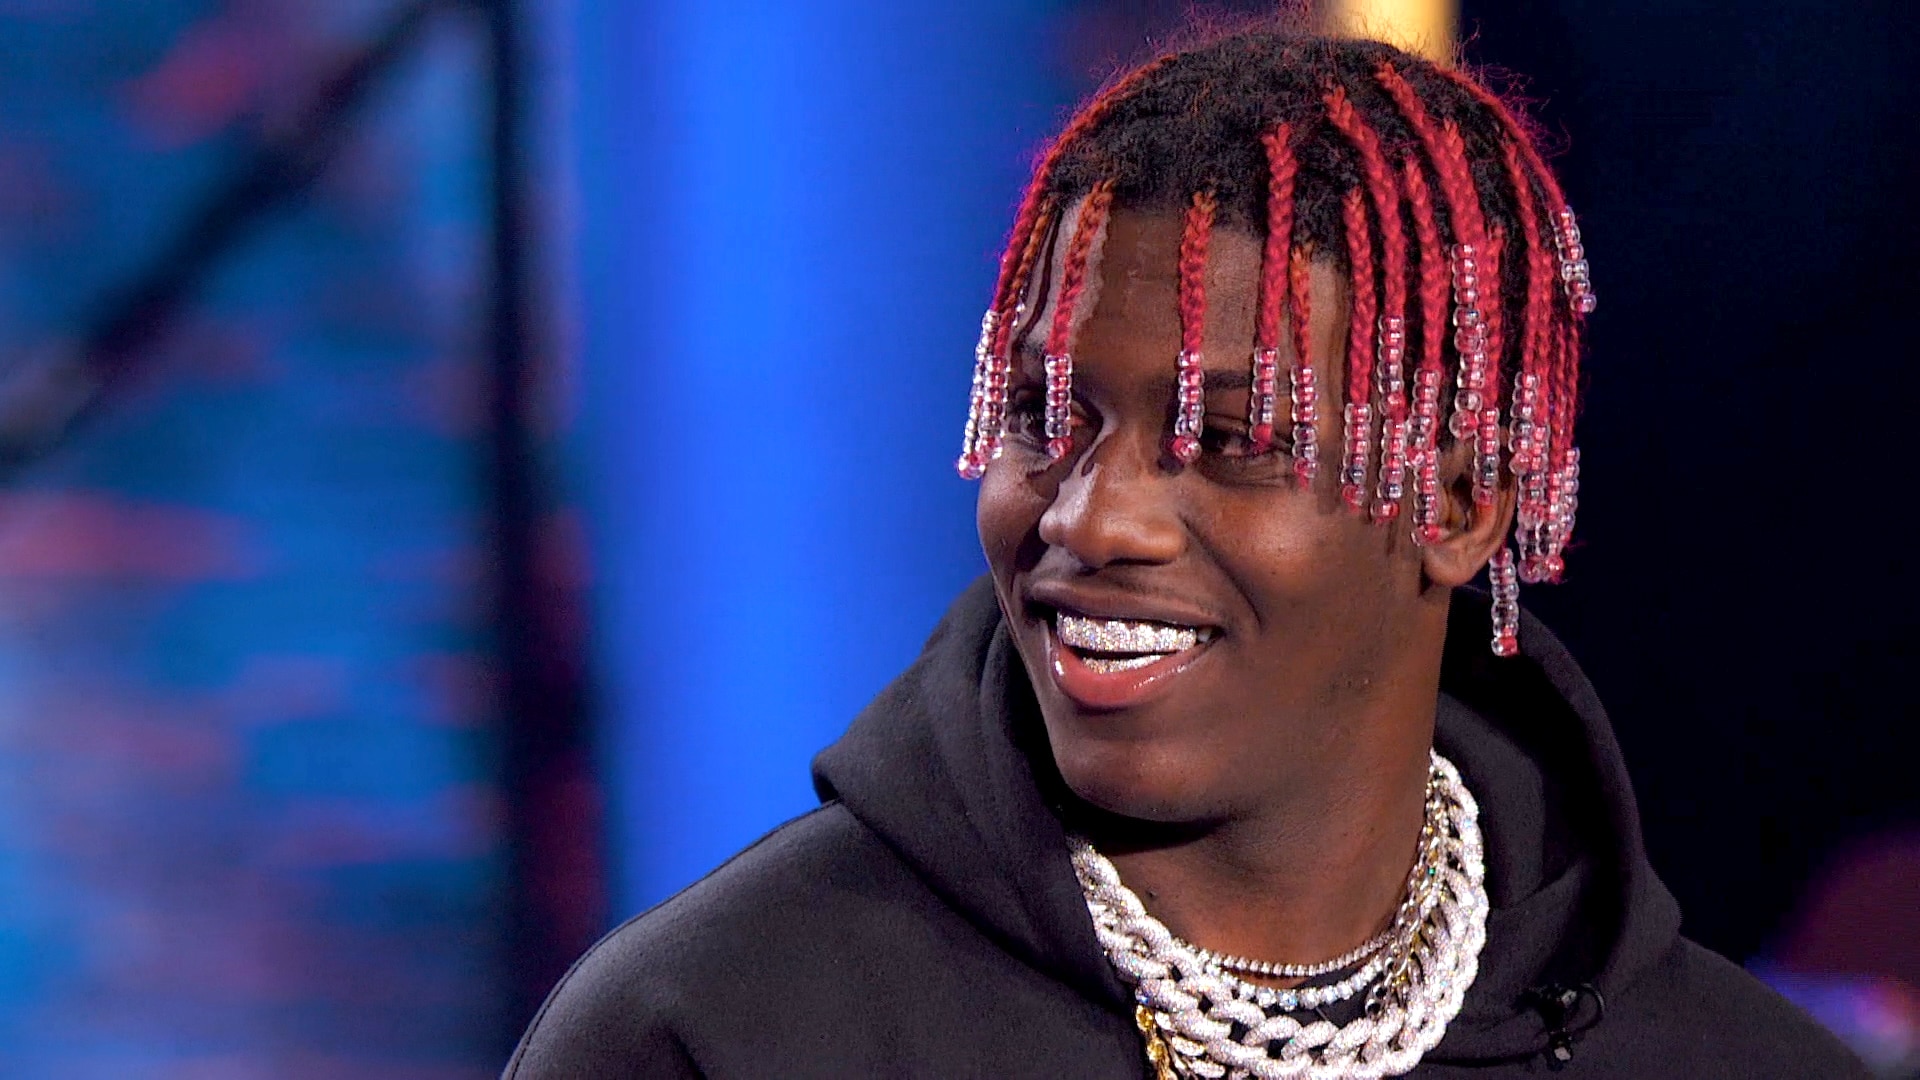 Lil Yachty smiling face